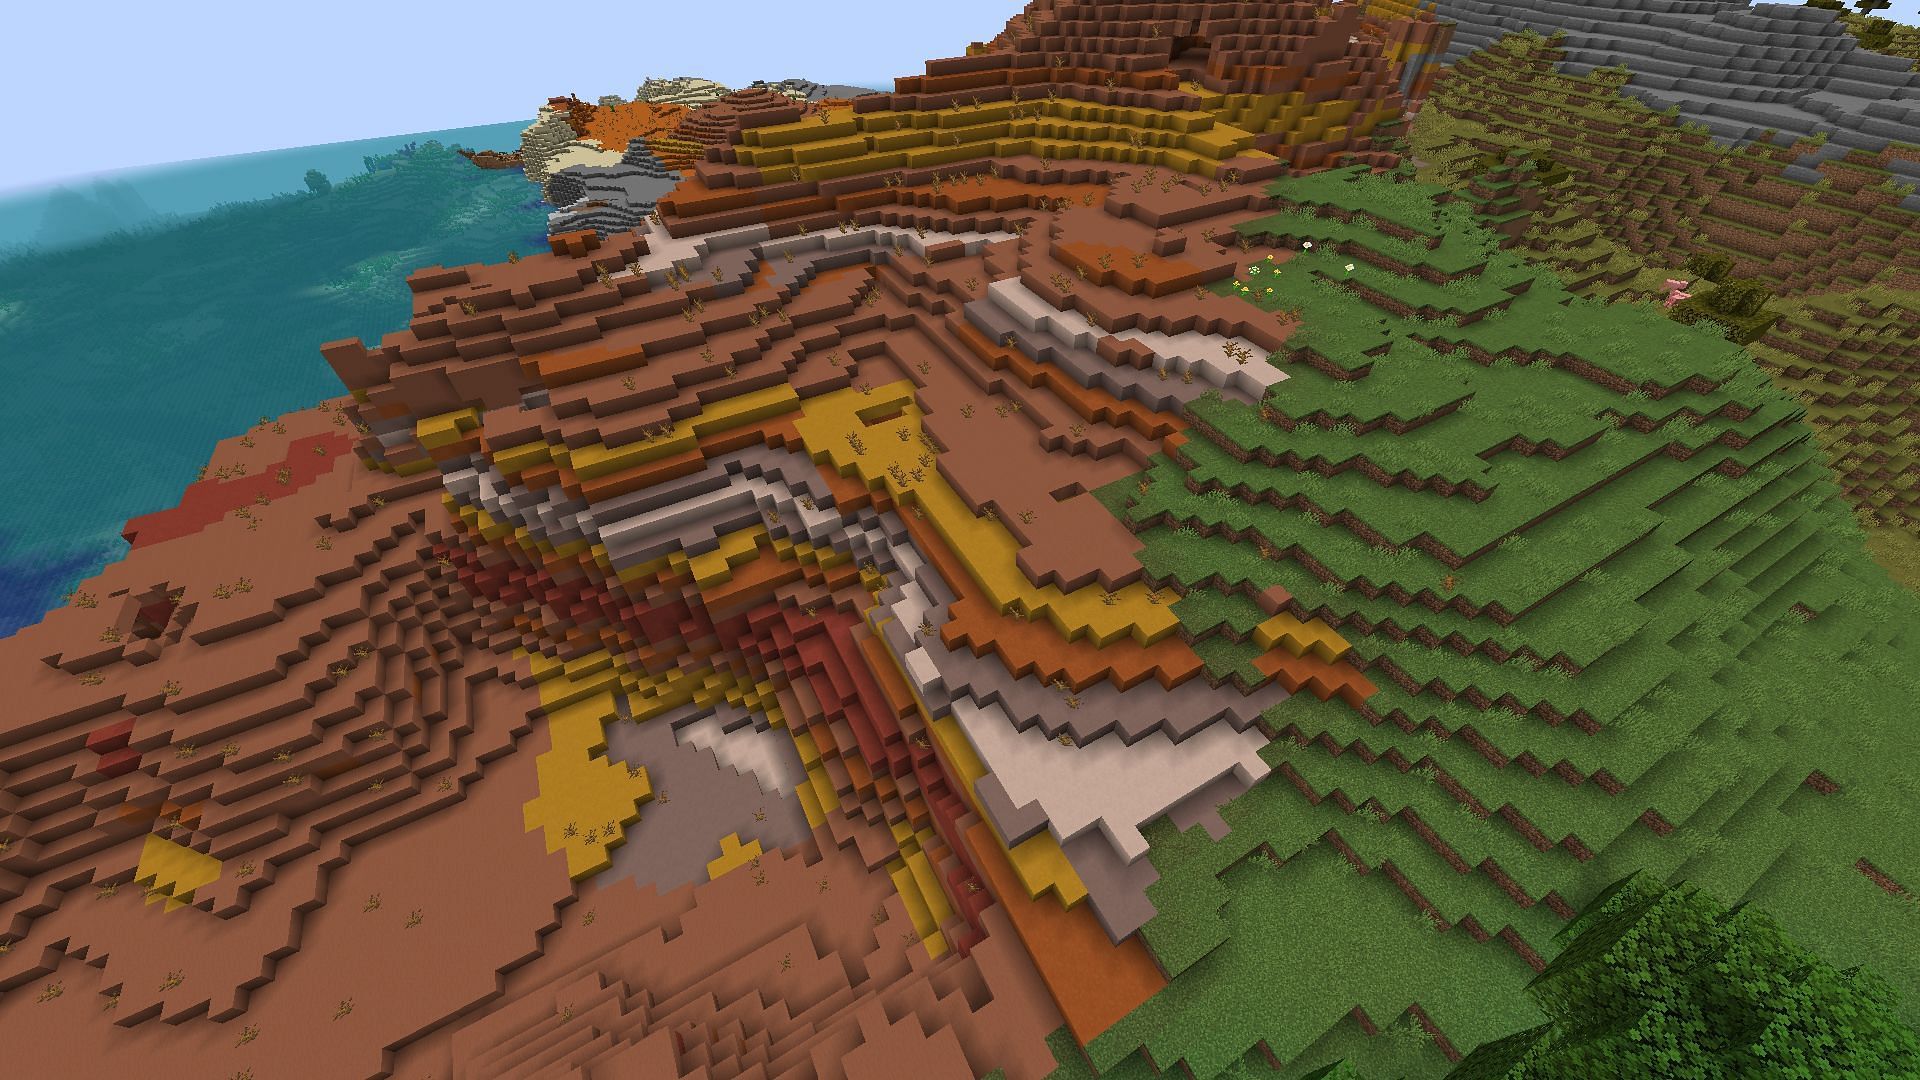 The badlands biome made up of natural terracotta (Image via Minecraft)